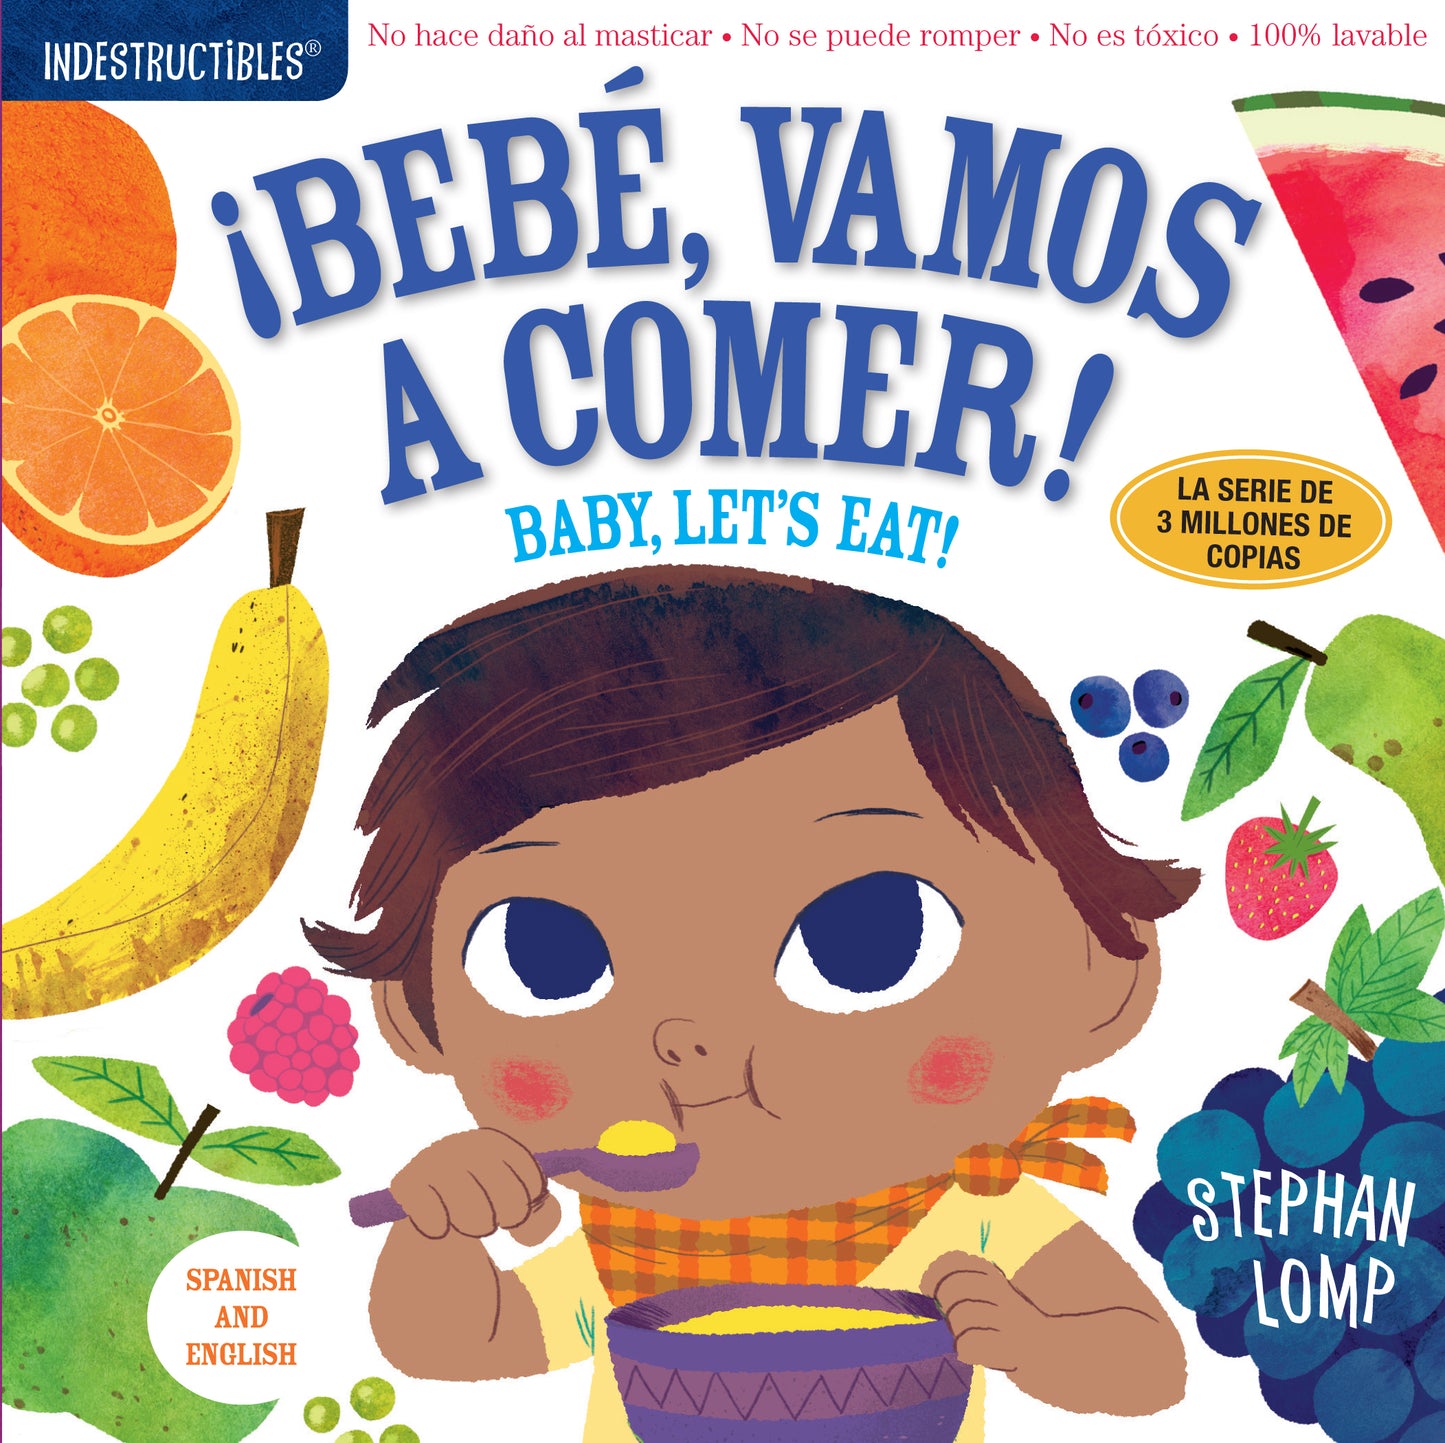 Bebe, Vamos A Comer! Baby, Let's Eat! by Stephan Lomp